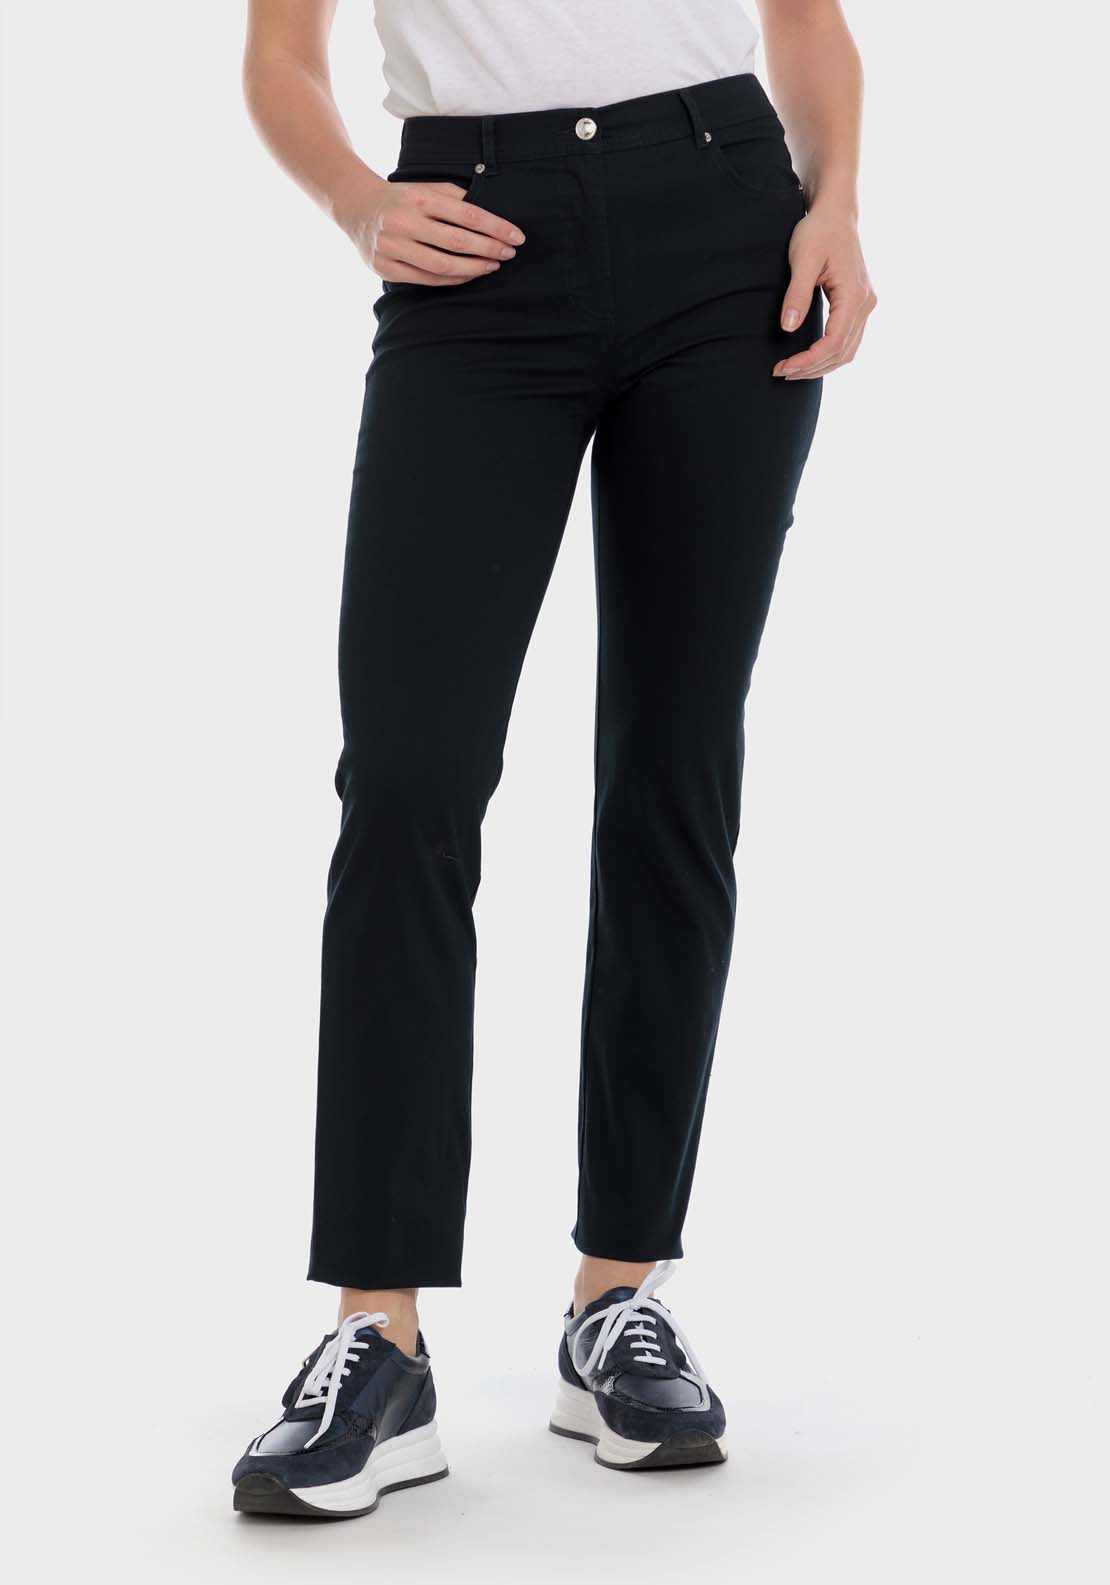 Punt Roma Cotton Trousers With Elastic 2 Shaws Department Stores